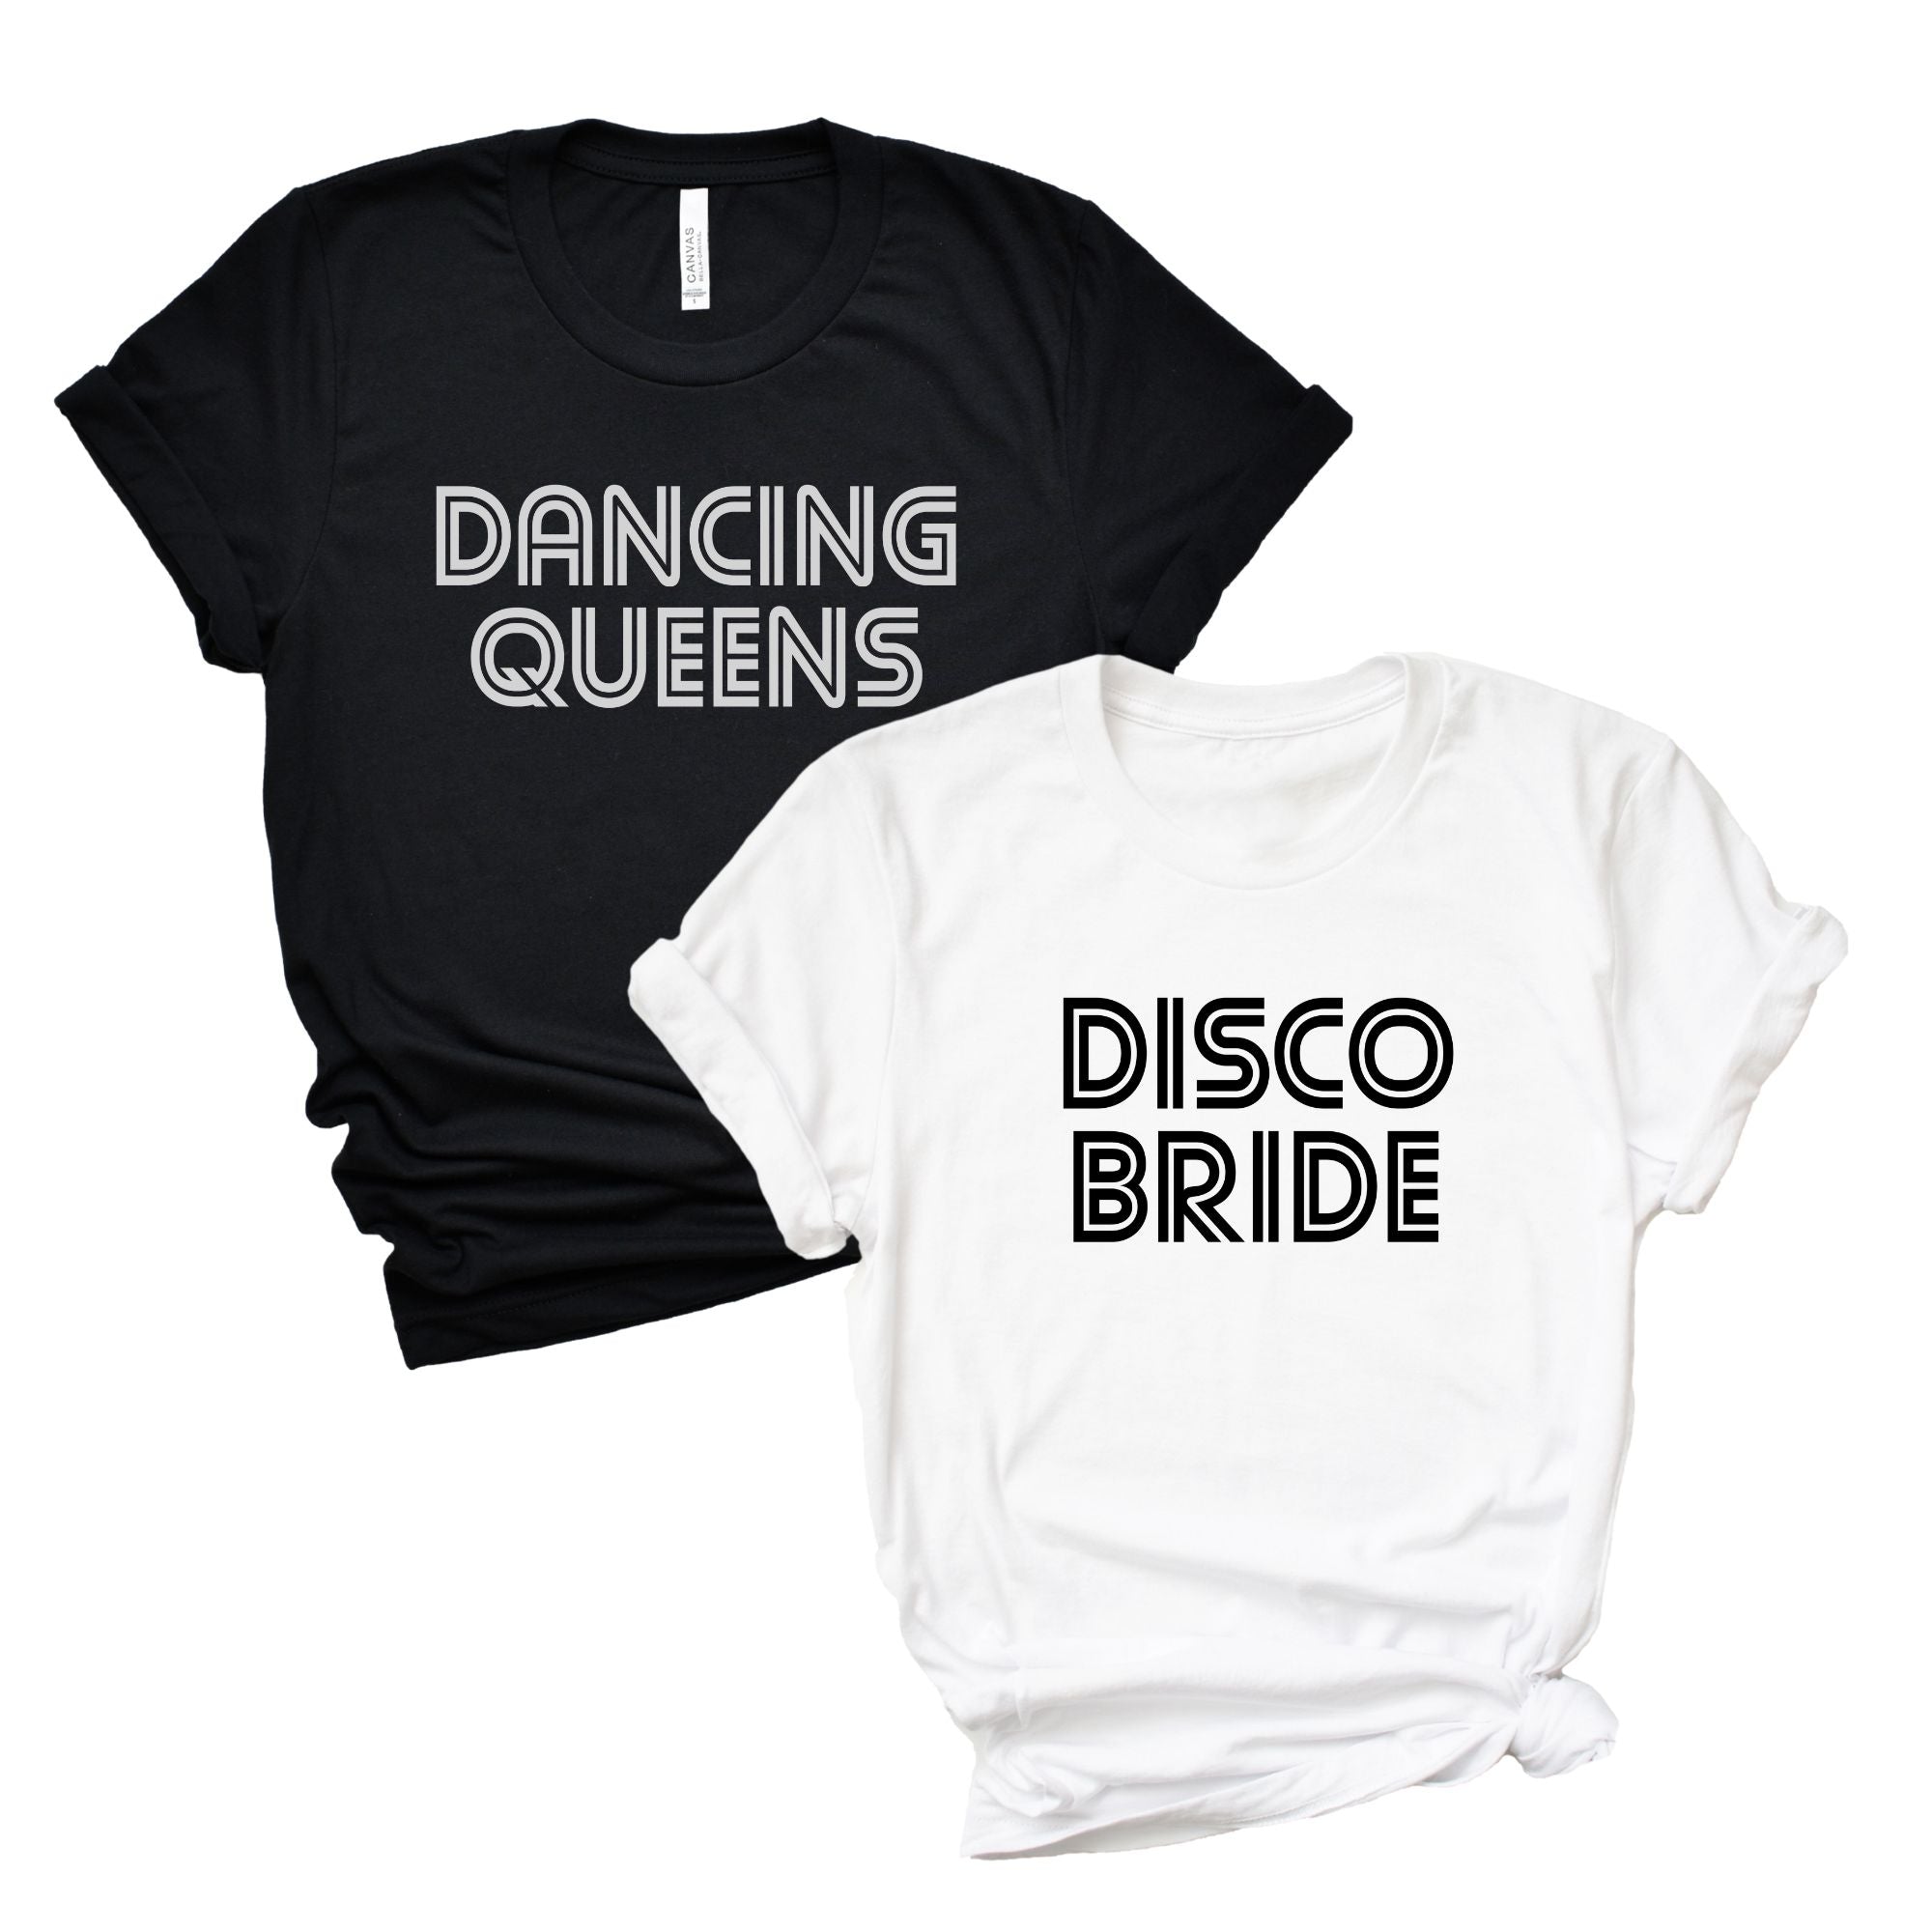 Disco Bride / Dancing Queens Shirt - Sprinkled With Pink #bachelorette #custom #gifts